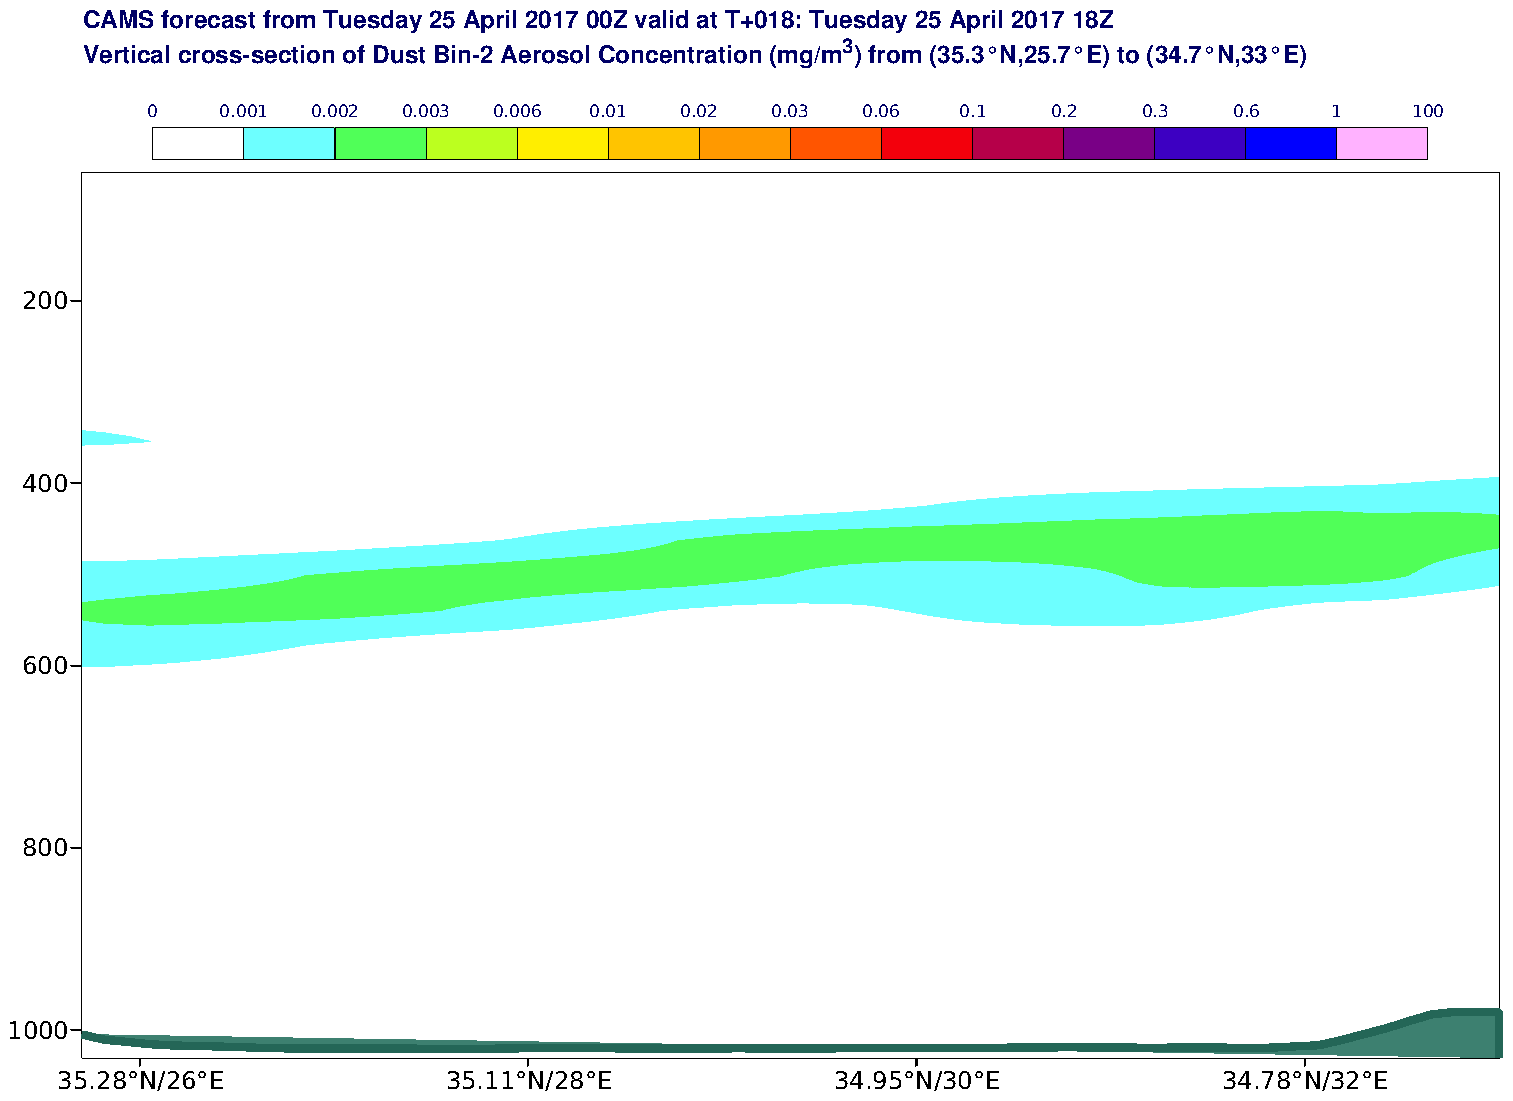 Vertical cross-section of Dust Bin-2 Aerosol Concentration (mg/m3) valid at T18 - 2017-04-25 18:00